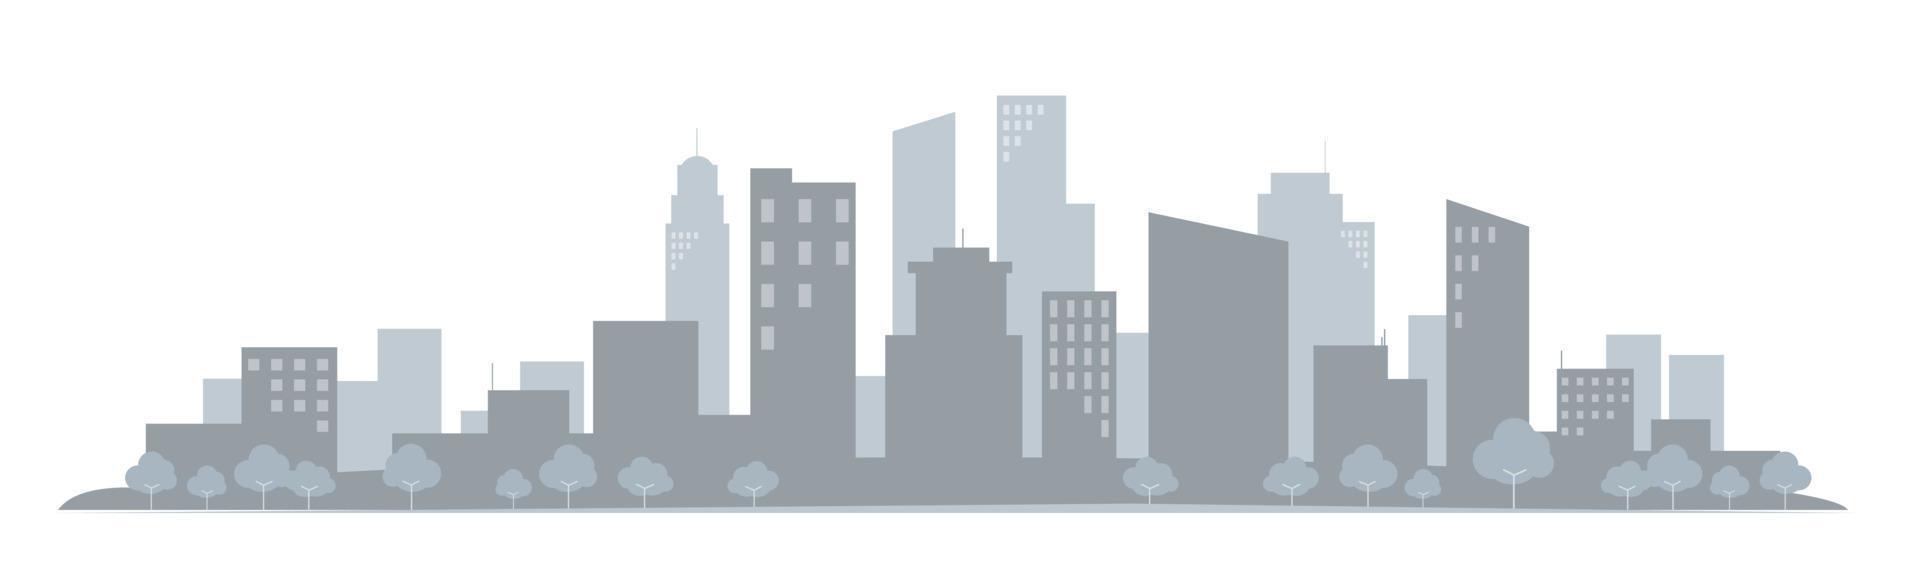 City Far Away looking blue grey ecology monochrome flate graphice illustration vector